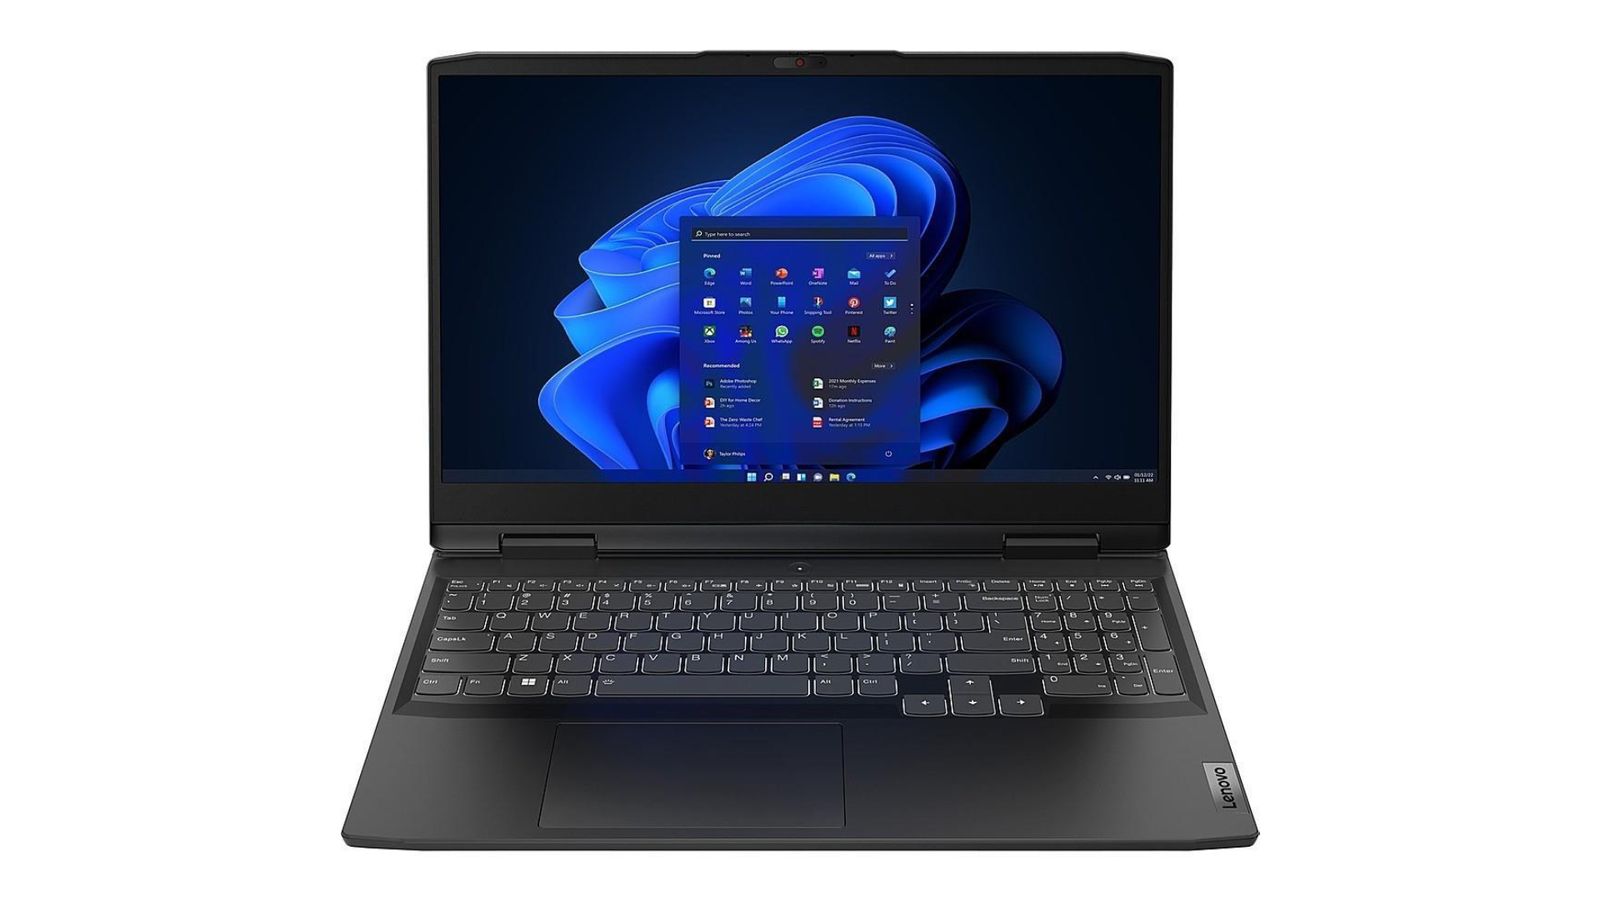 Best Lenovo gaming laptop - Lenovo IdeaPad Gaming 3 product image of a black laptop featuring a blue background and Windows 11 on the display. 